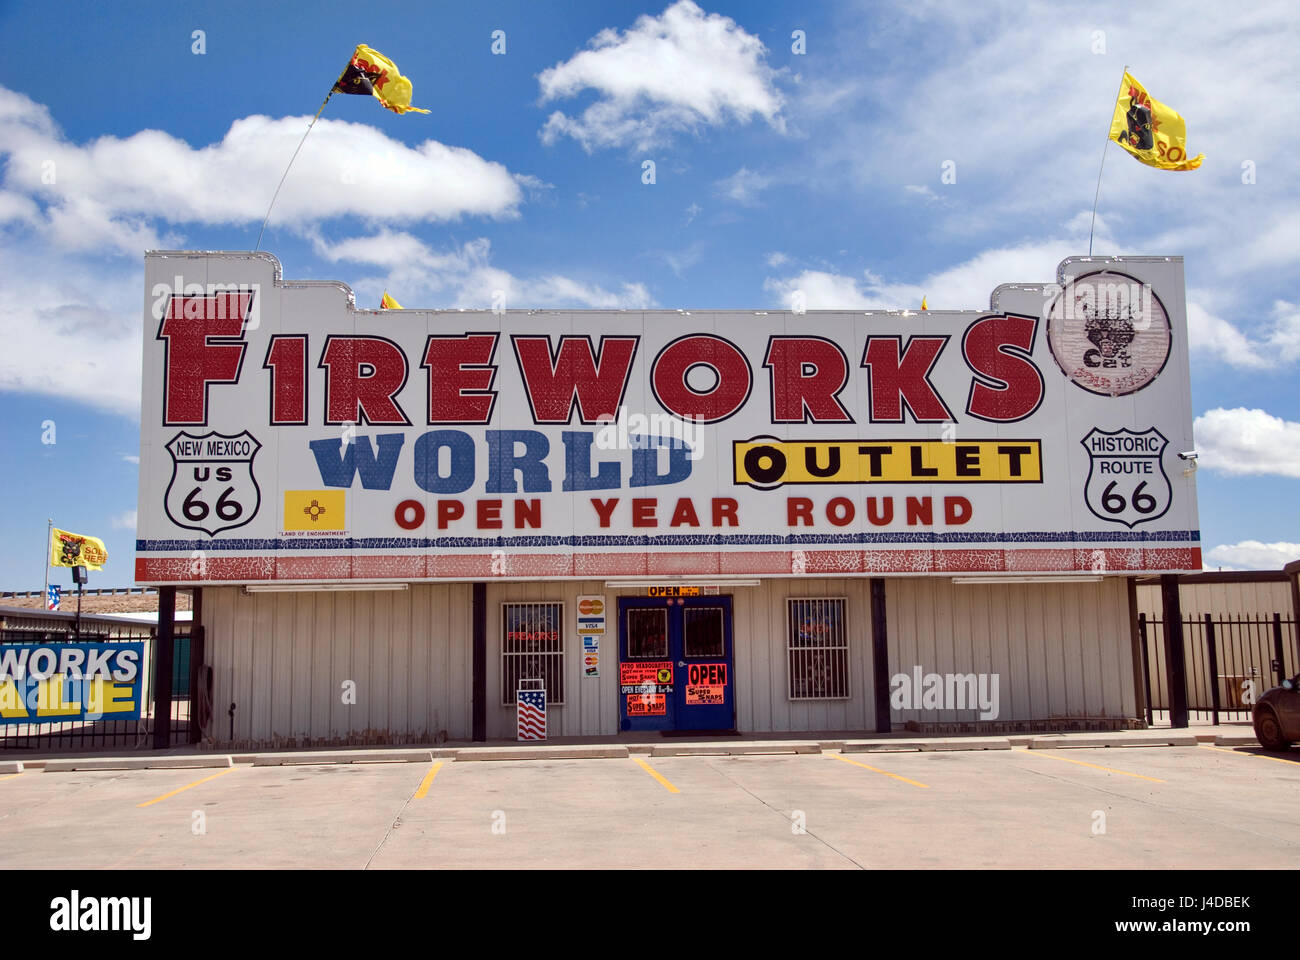 Fireworks World Outlet Stock Photo: 140435979 - Alamy